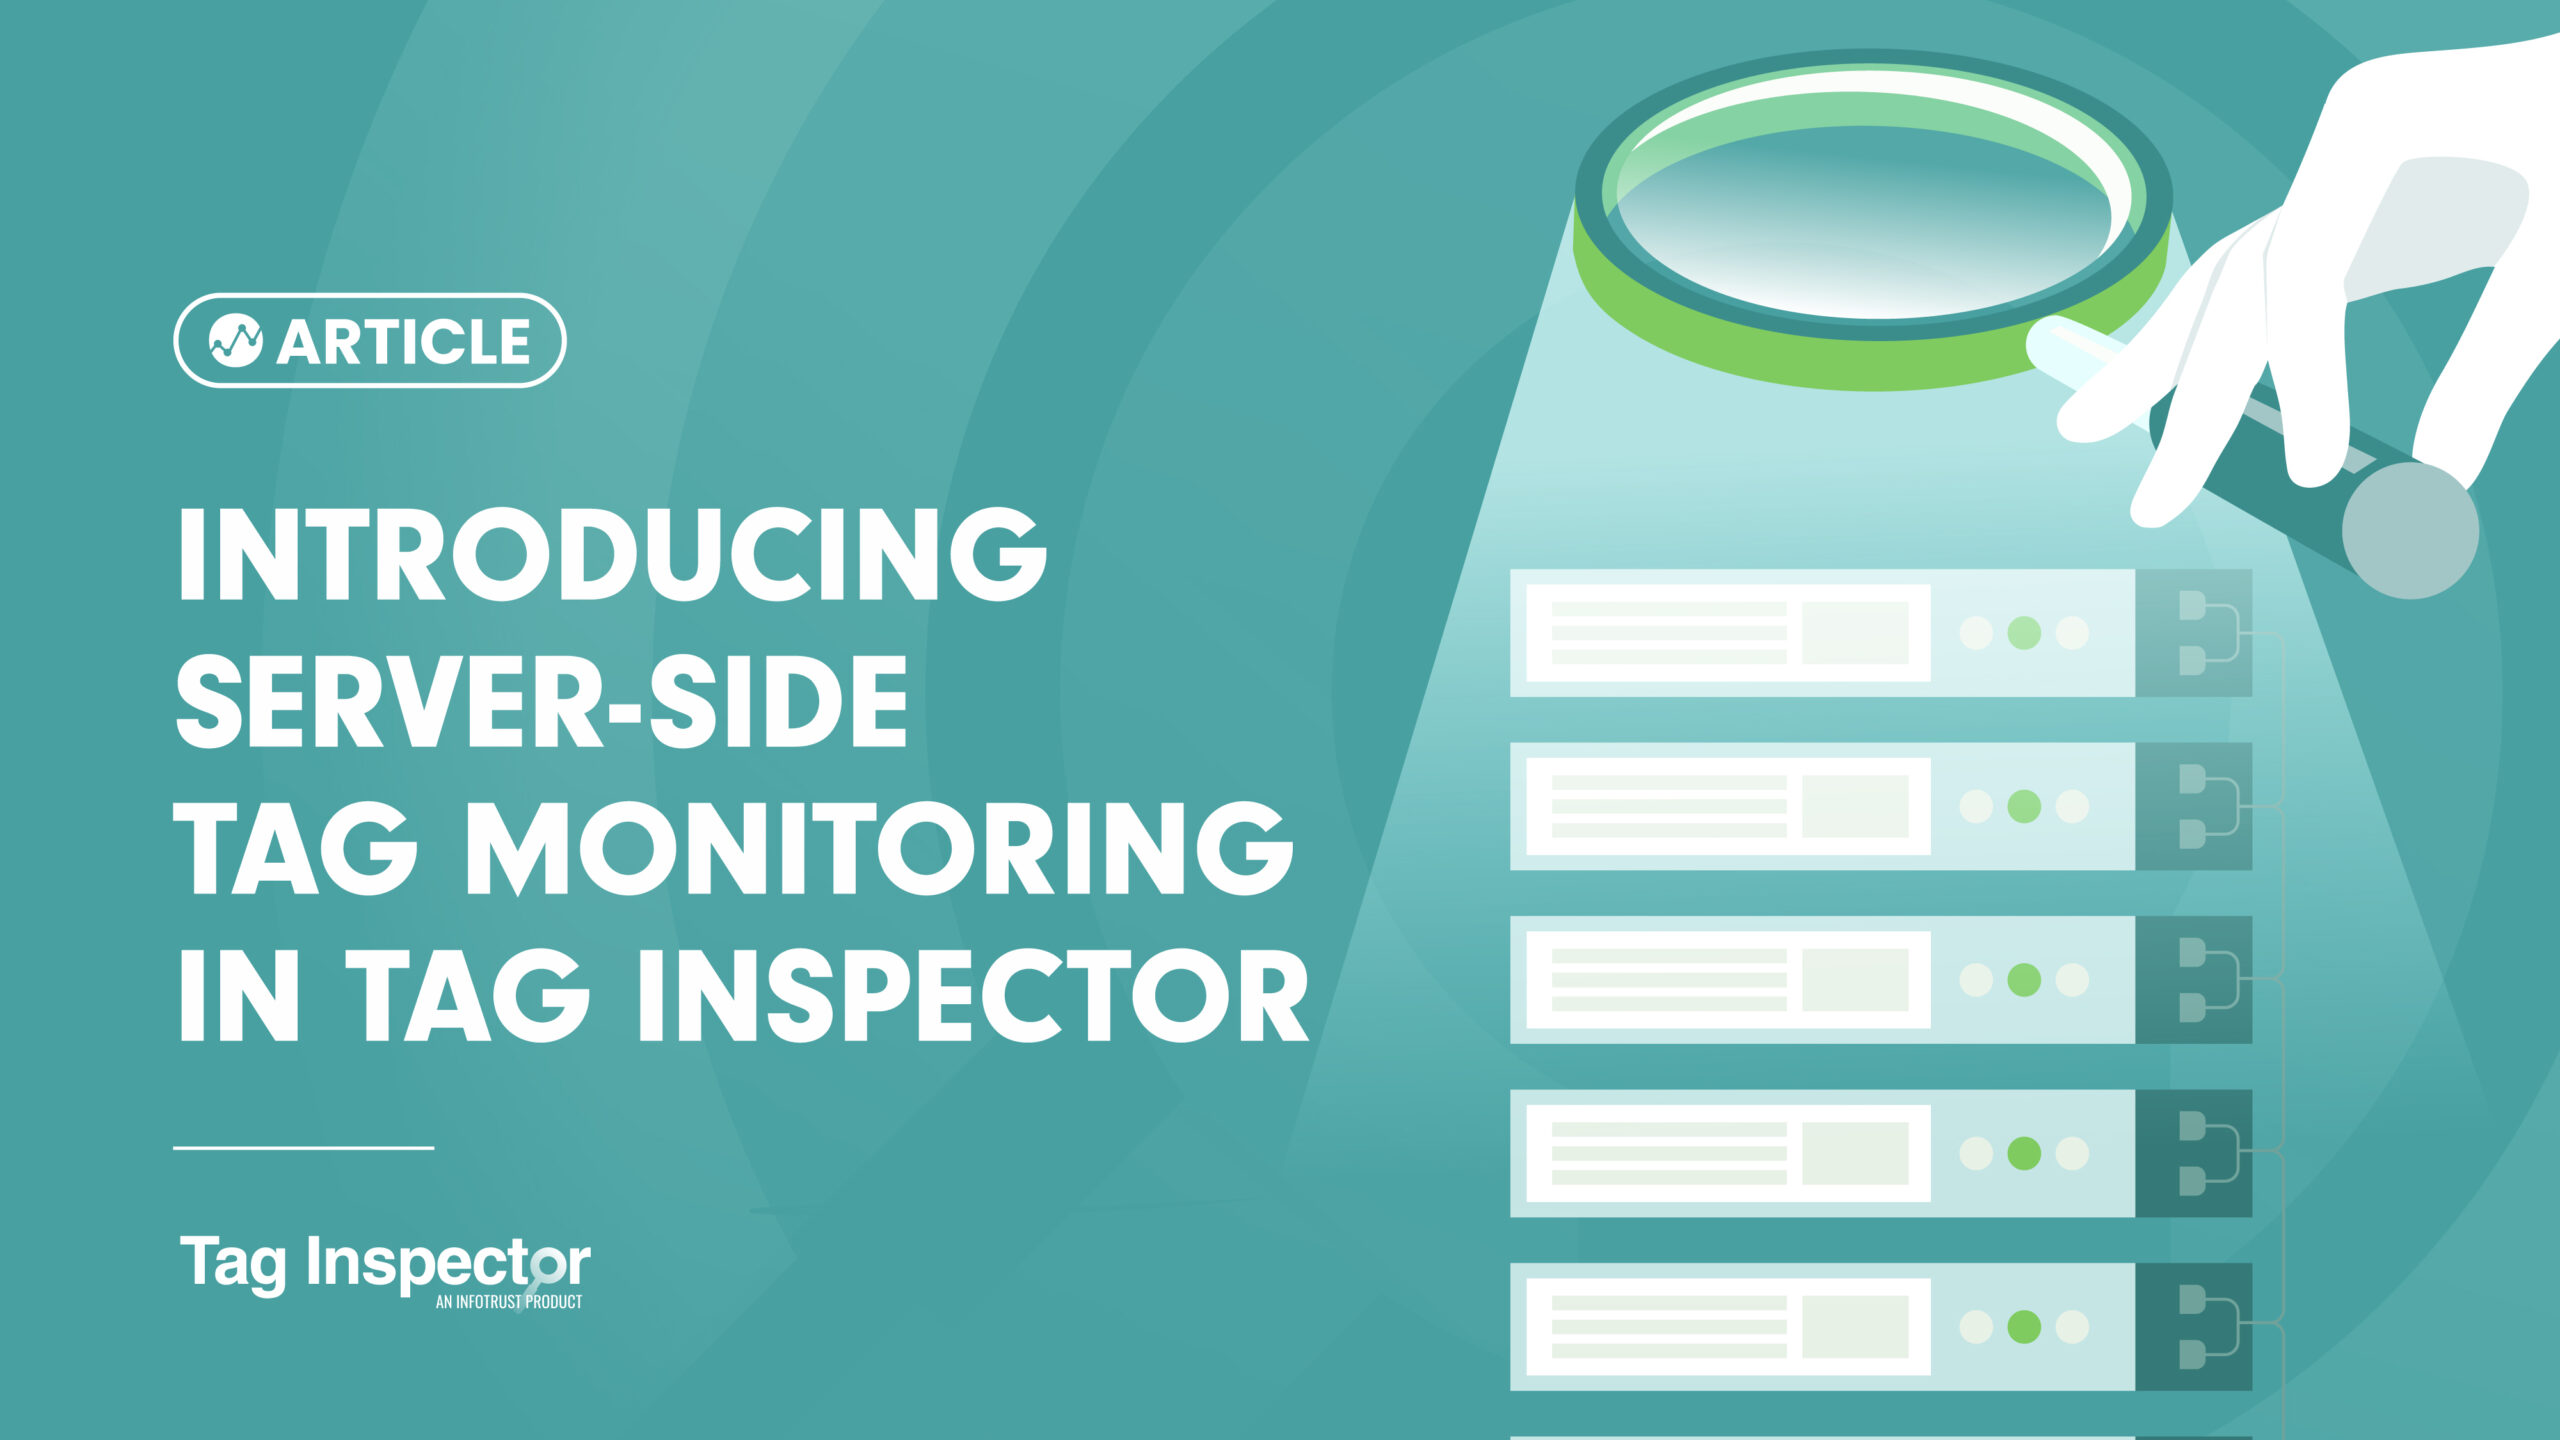 Introducing Server-side Tag Monitoring in Tag Inspector